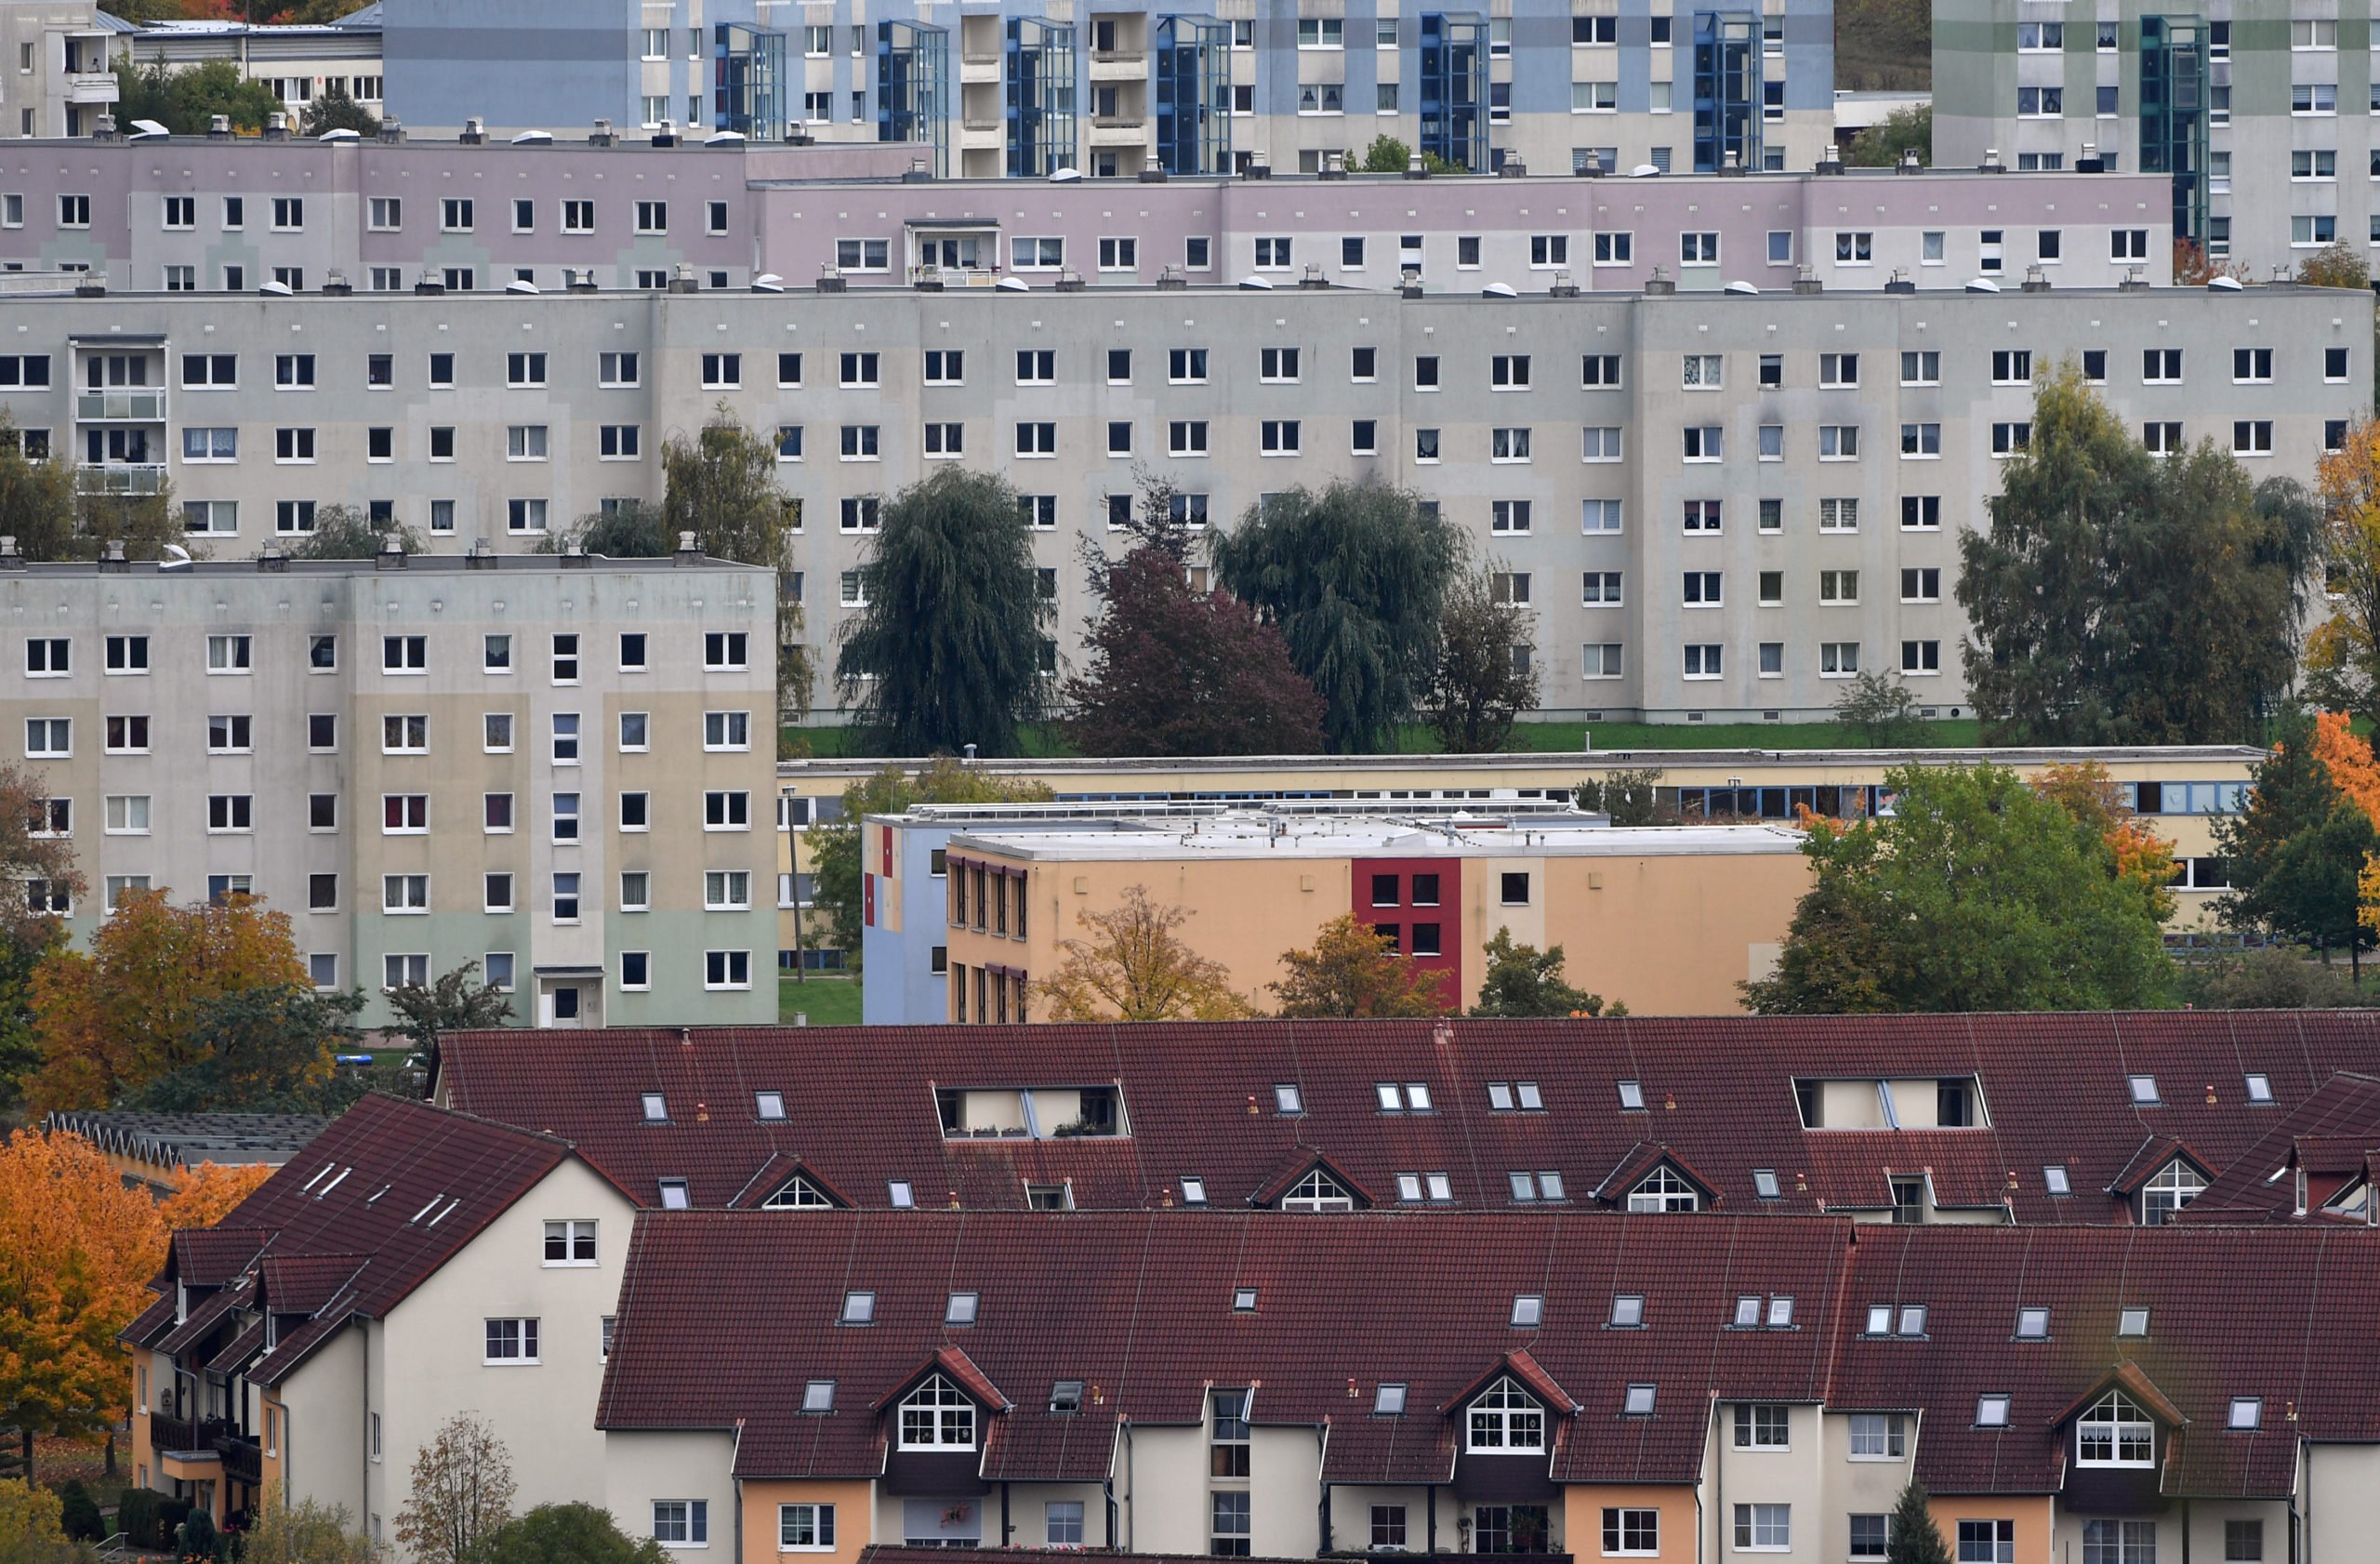 Majority of German tenants have lost hope of buying a home